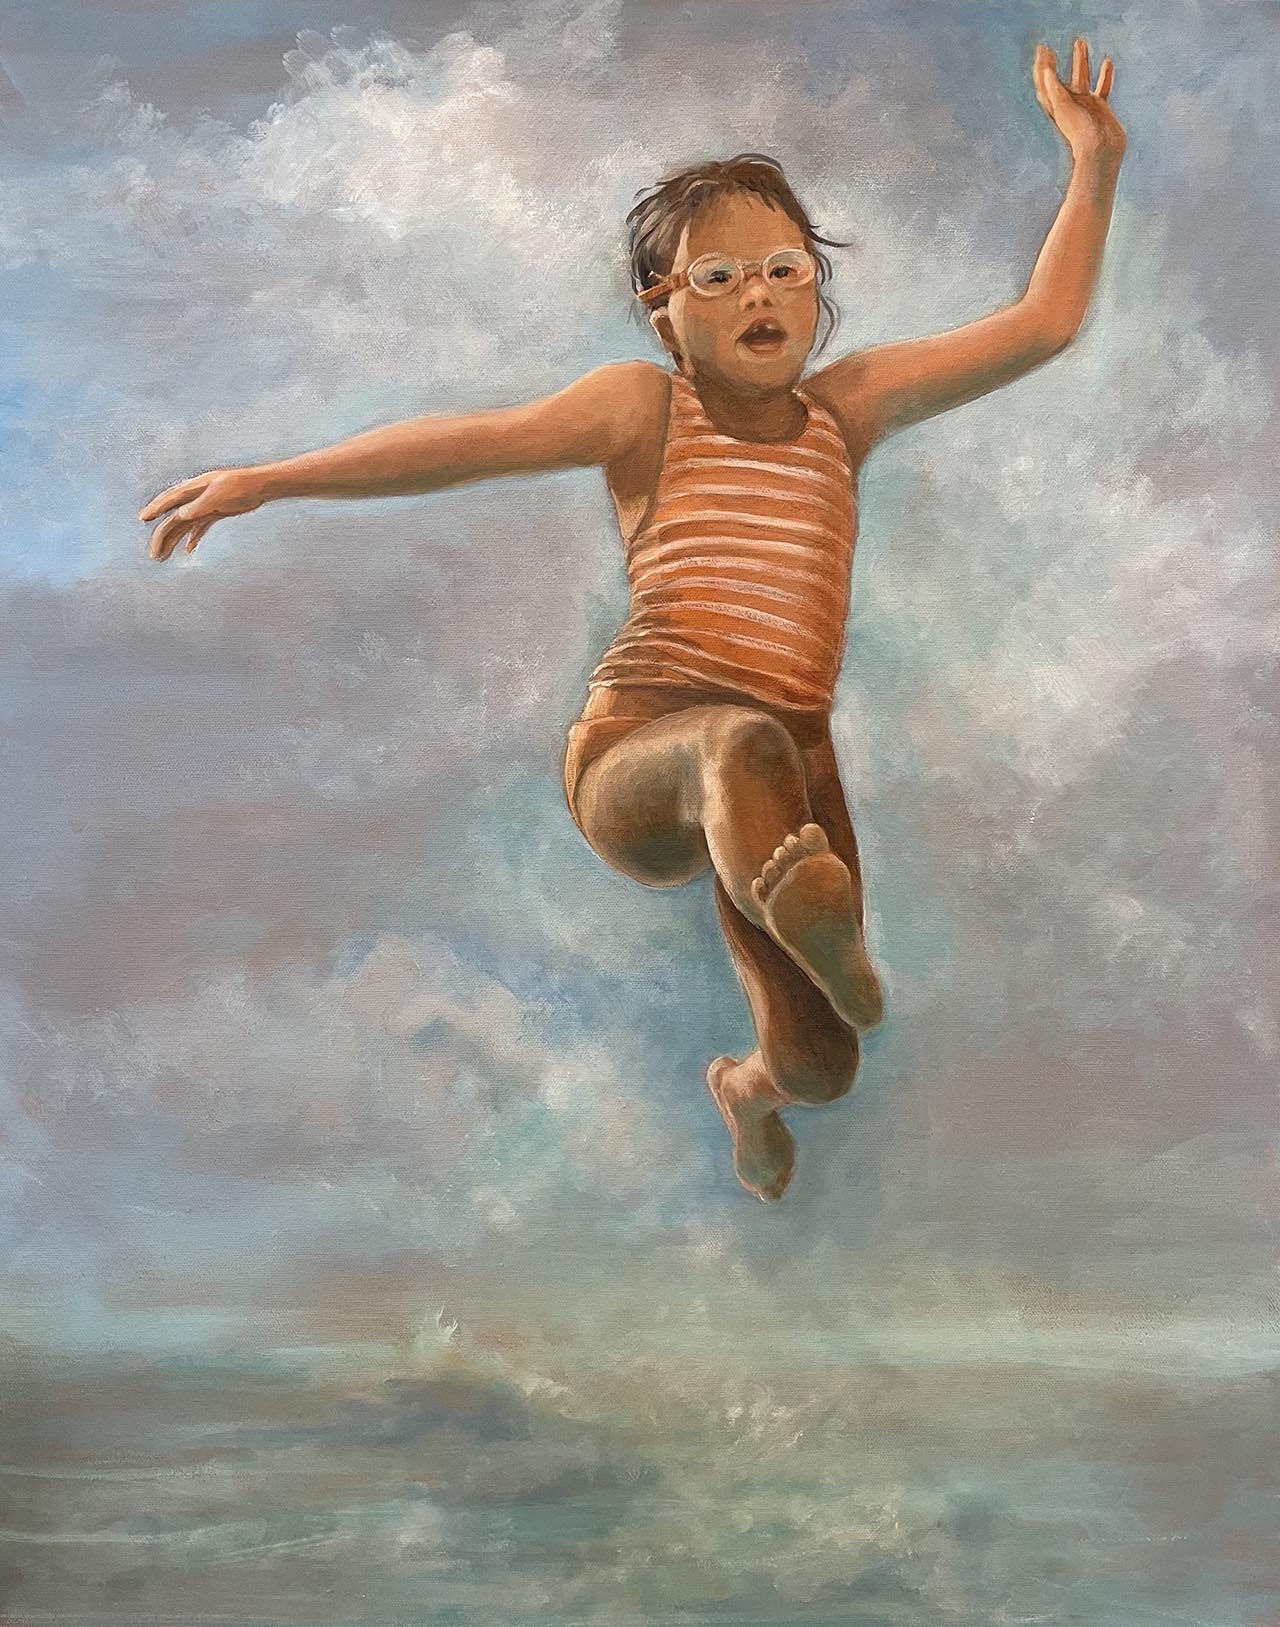 Oil painting of a girl wearing a swimsuit jumping into water against a cloudy sky.. Painted by Carol Williamson.